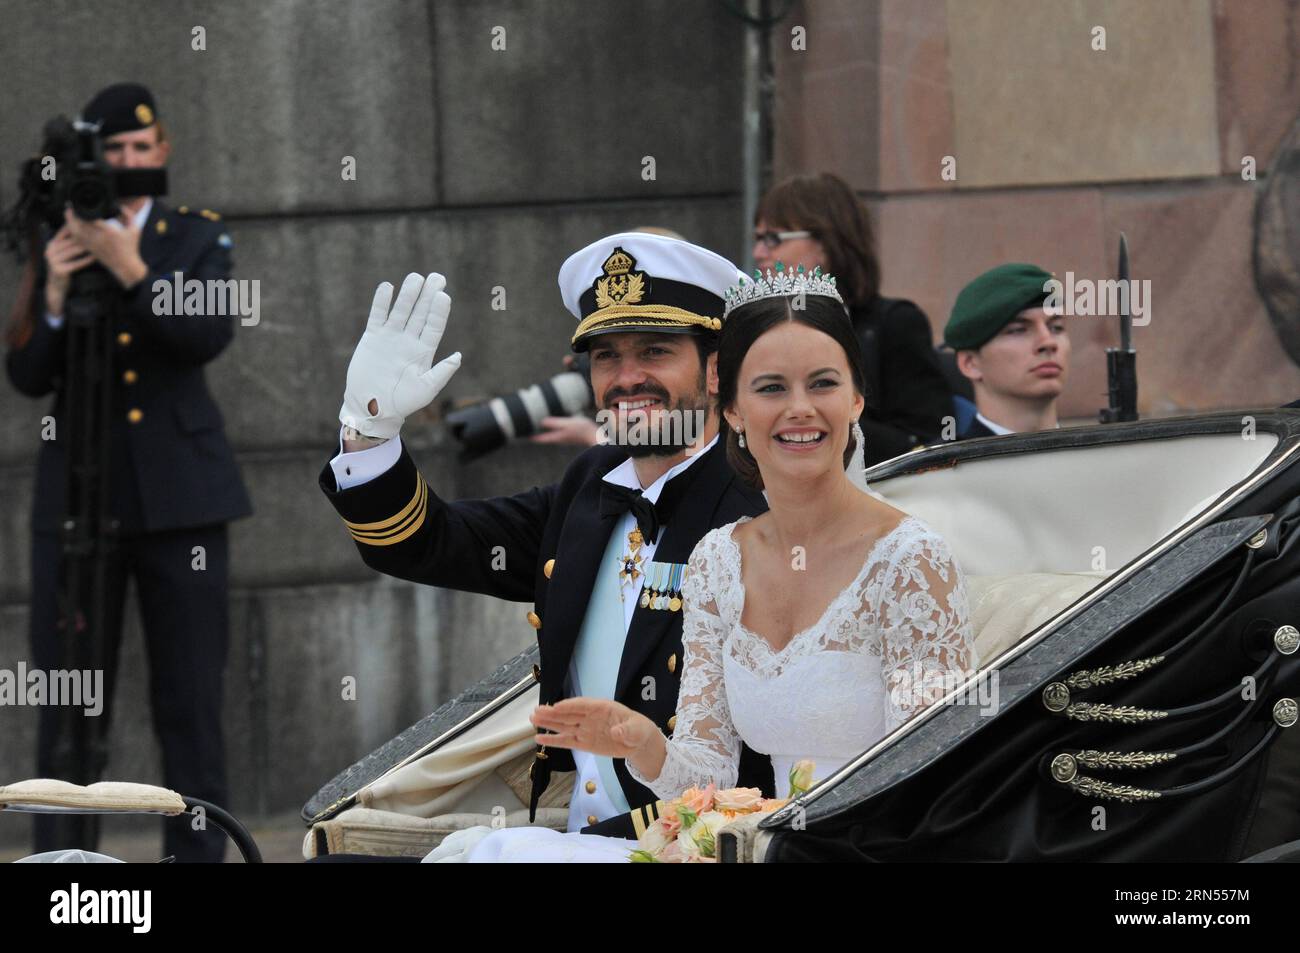 ENTERTAINMENT ADEL Schweden: Hochzeit von Prinz Carl Philip und Sofia Hellqvist 150613 -- STOCKHOLM, June 13, 2015 -- Sweden s Prince Carl Philip and Princess Sofia in the carriage greet the people after their wedding ceremony at the Royal Chapel in Stockholm, Sweden, June 13, 2015.  SWEDEN-STOCKHOLM-ROYAL WEDDING RobxSchoenbaum PUBLICATIONxNOTxINxCHN Stock Photo